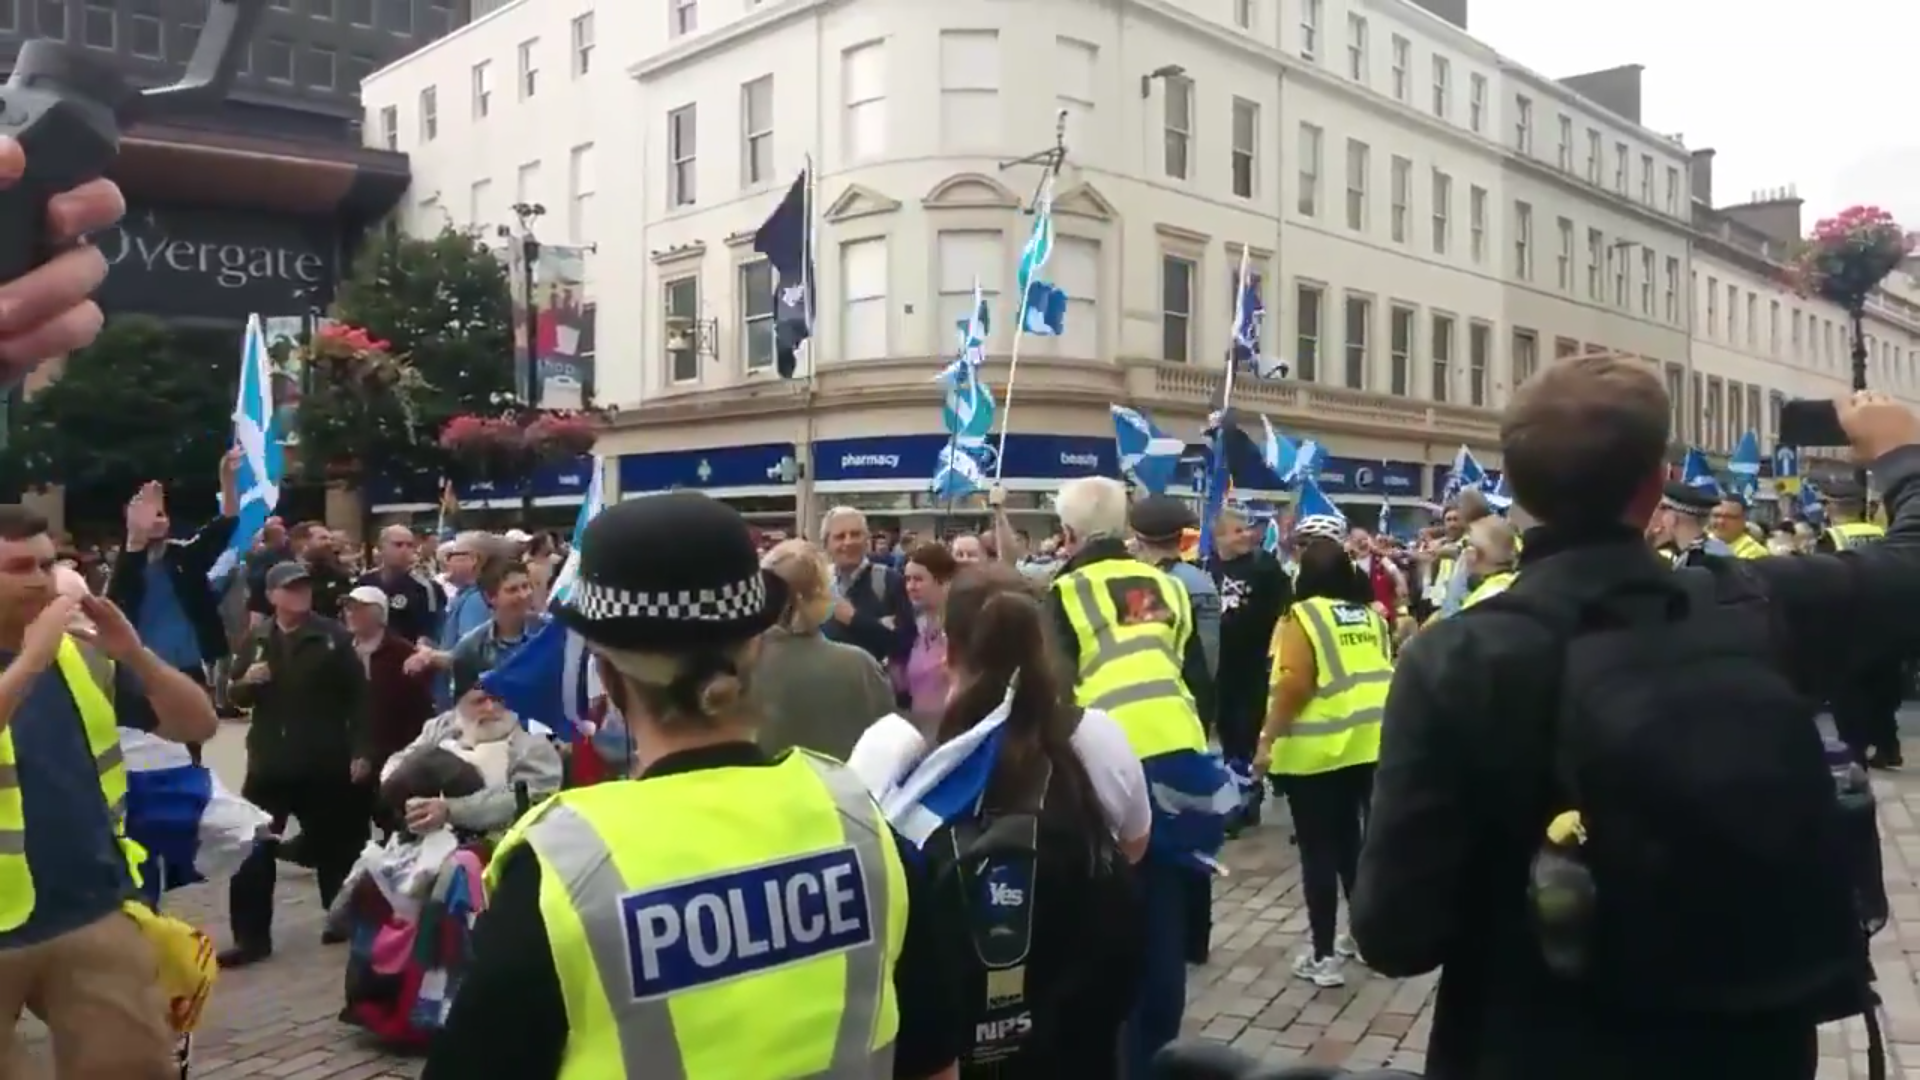 The march makes its way down Reform Street in Dundee.